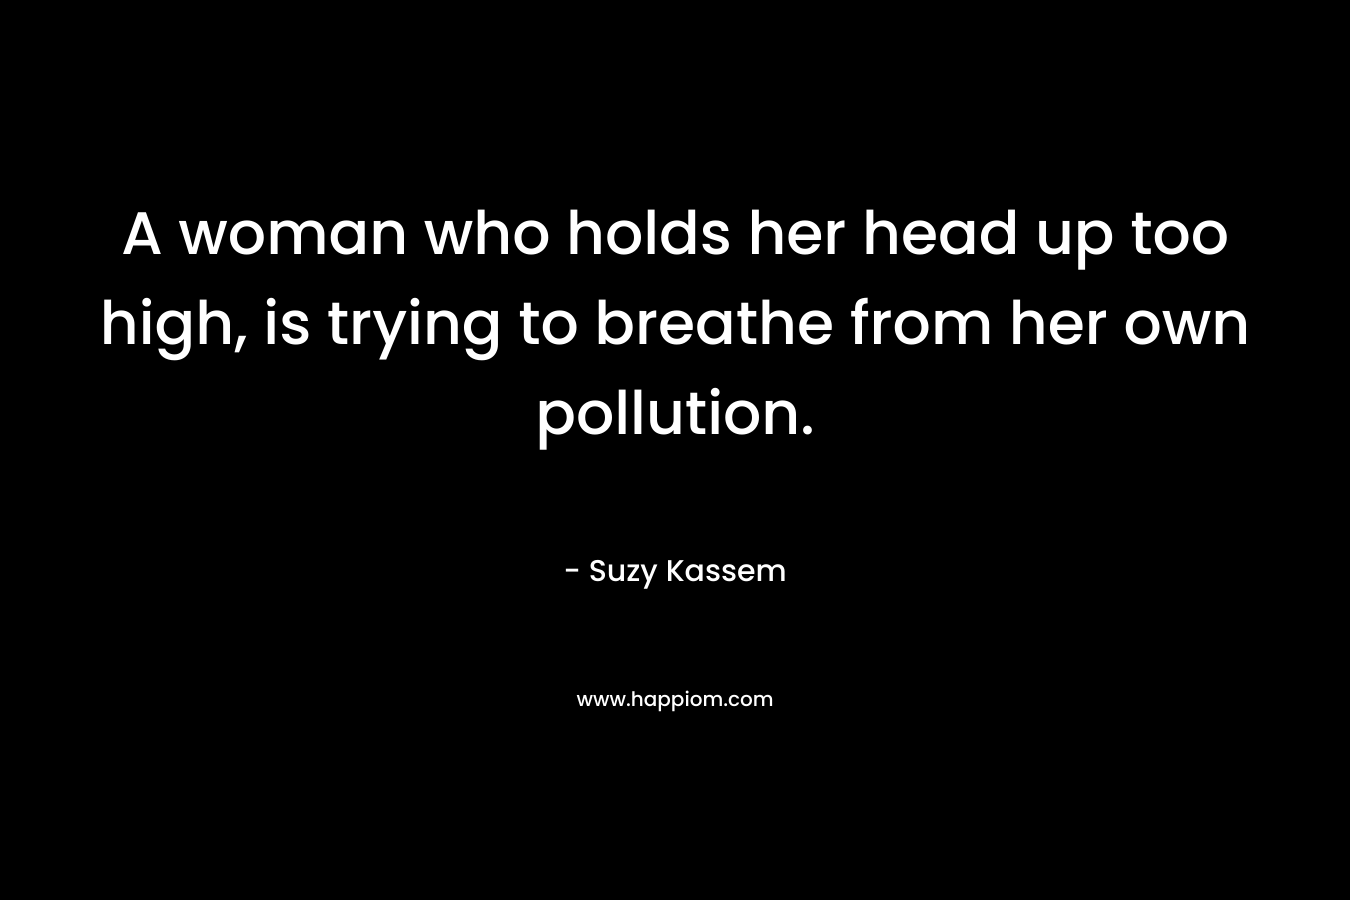 A woman who holds her head up too high, is trying to breathe from her own pollution. – Suzy Kassem